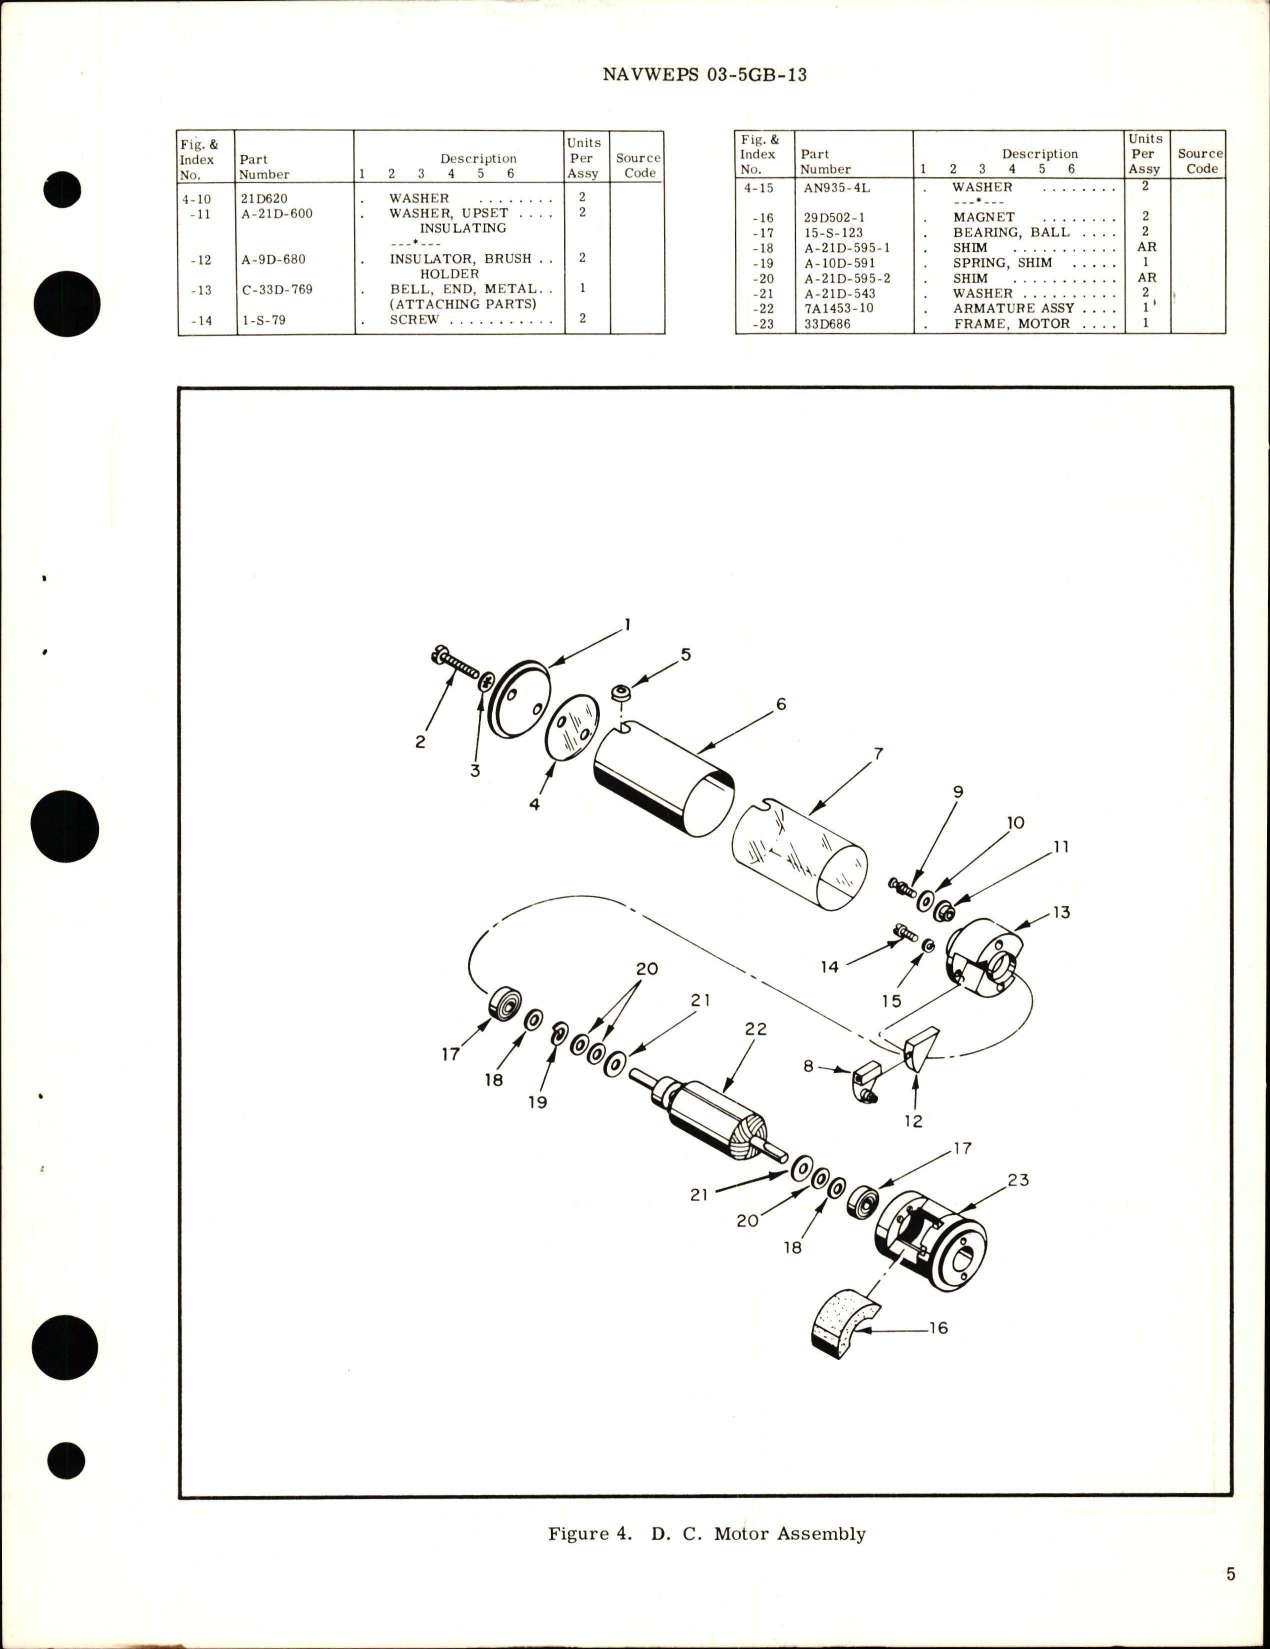 Sample page 5 from AirCorps Library document: Overhaul Instructions with Parts Breakdown for Anti-Collision Light Assembly - Part 41265 